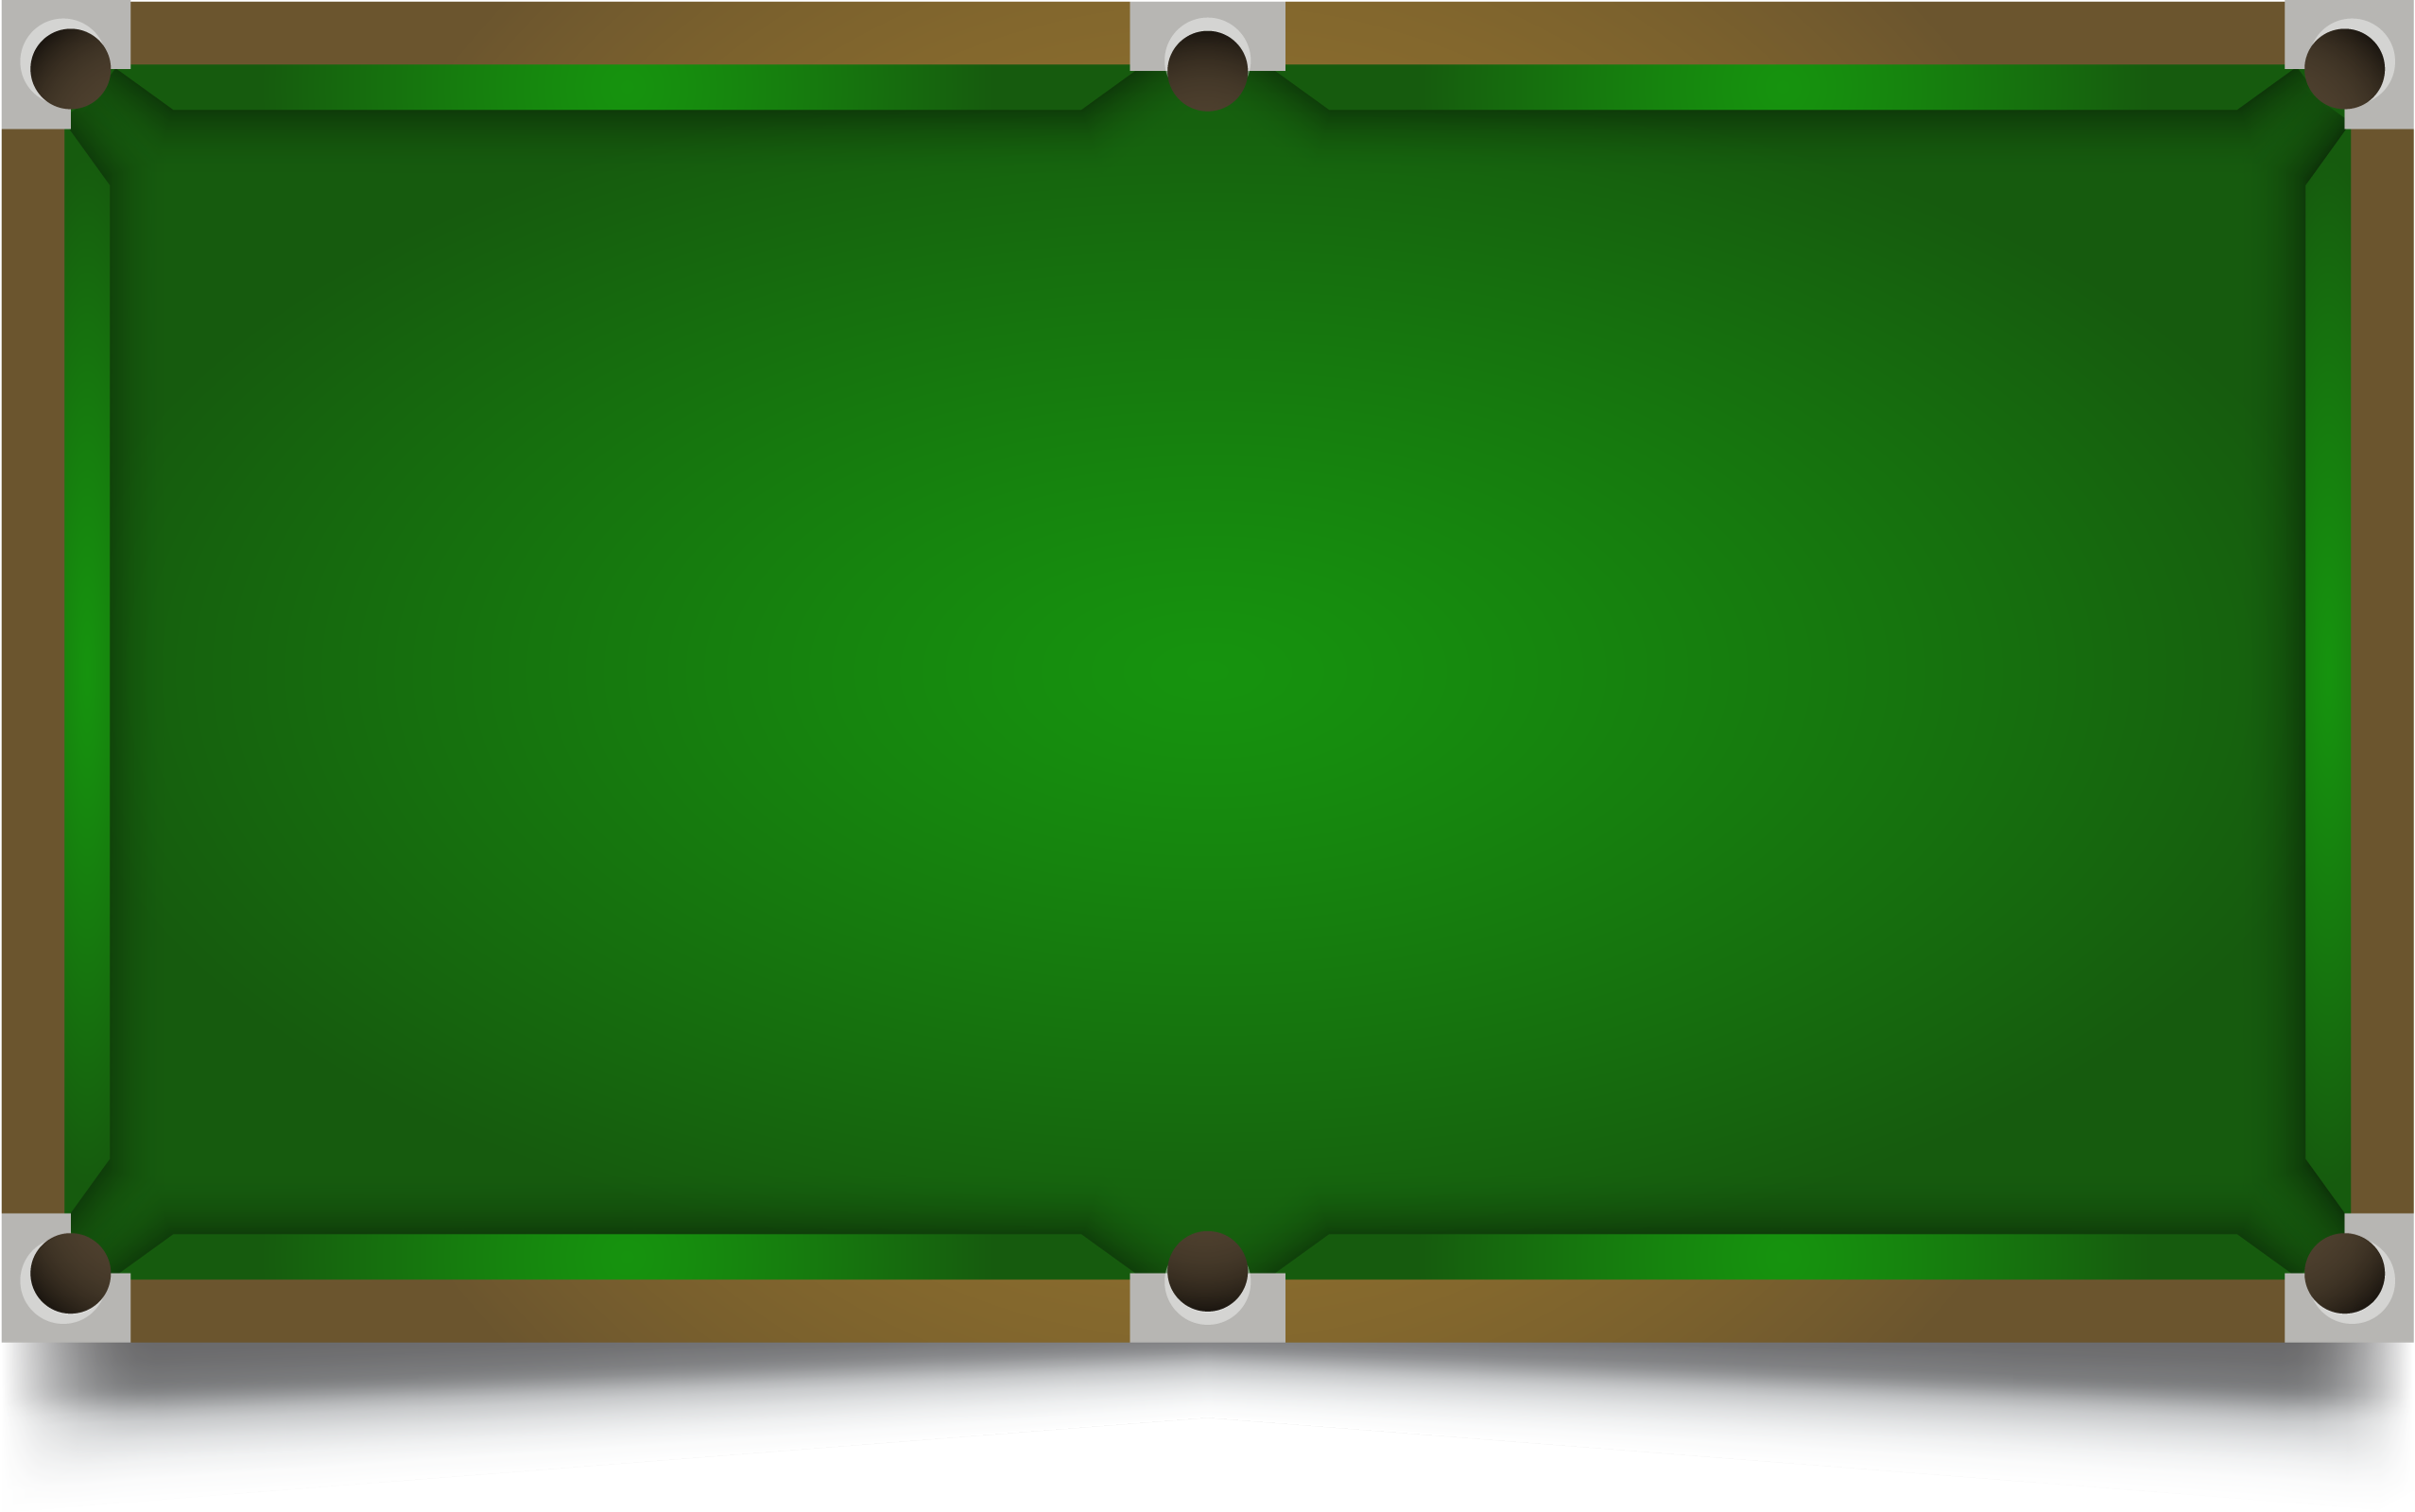 A Green Pool Table With White Balls